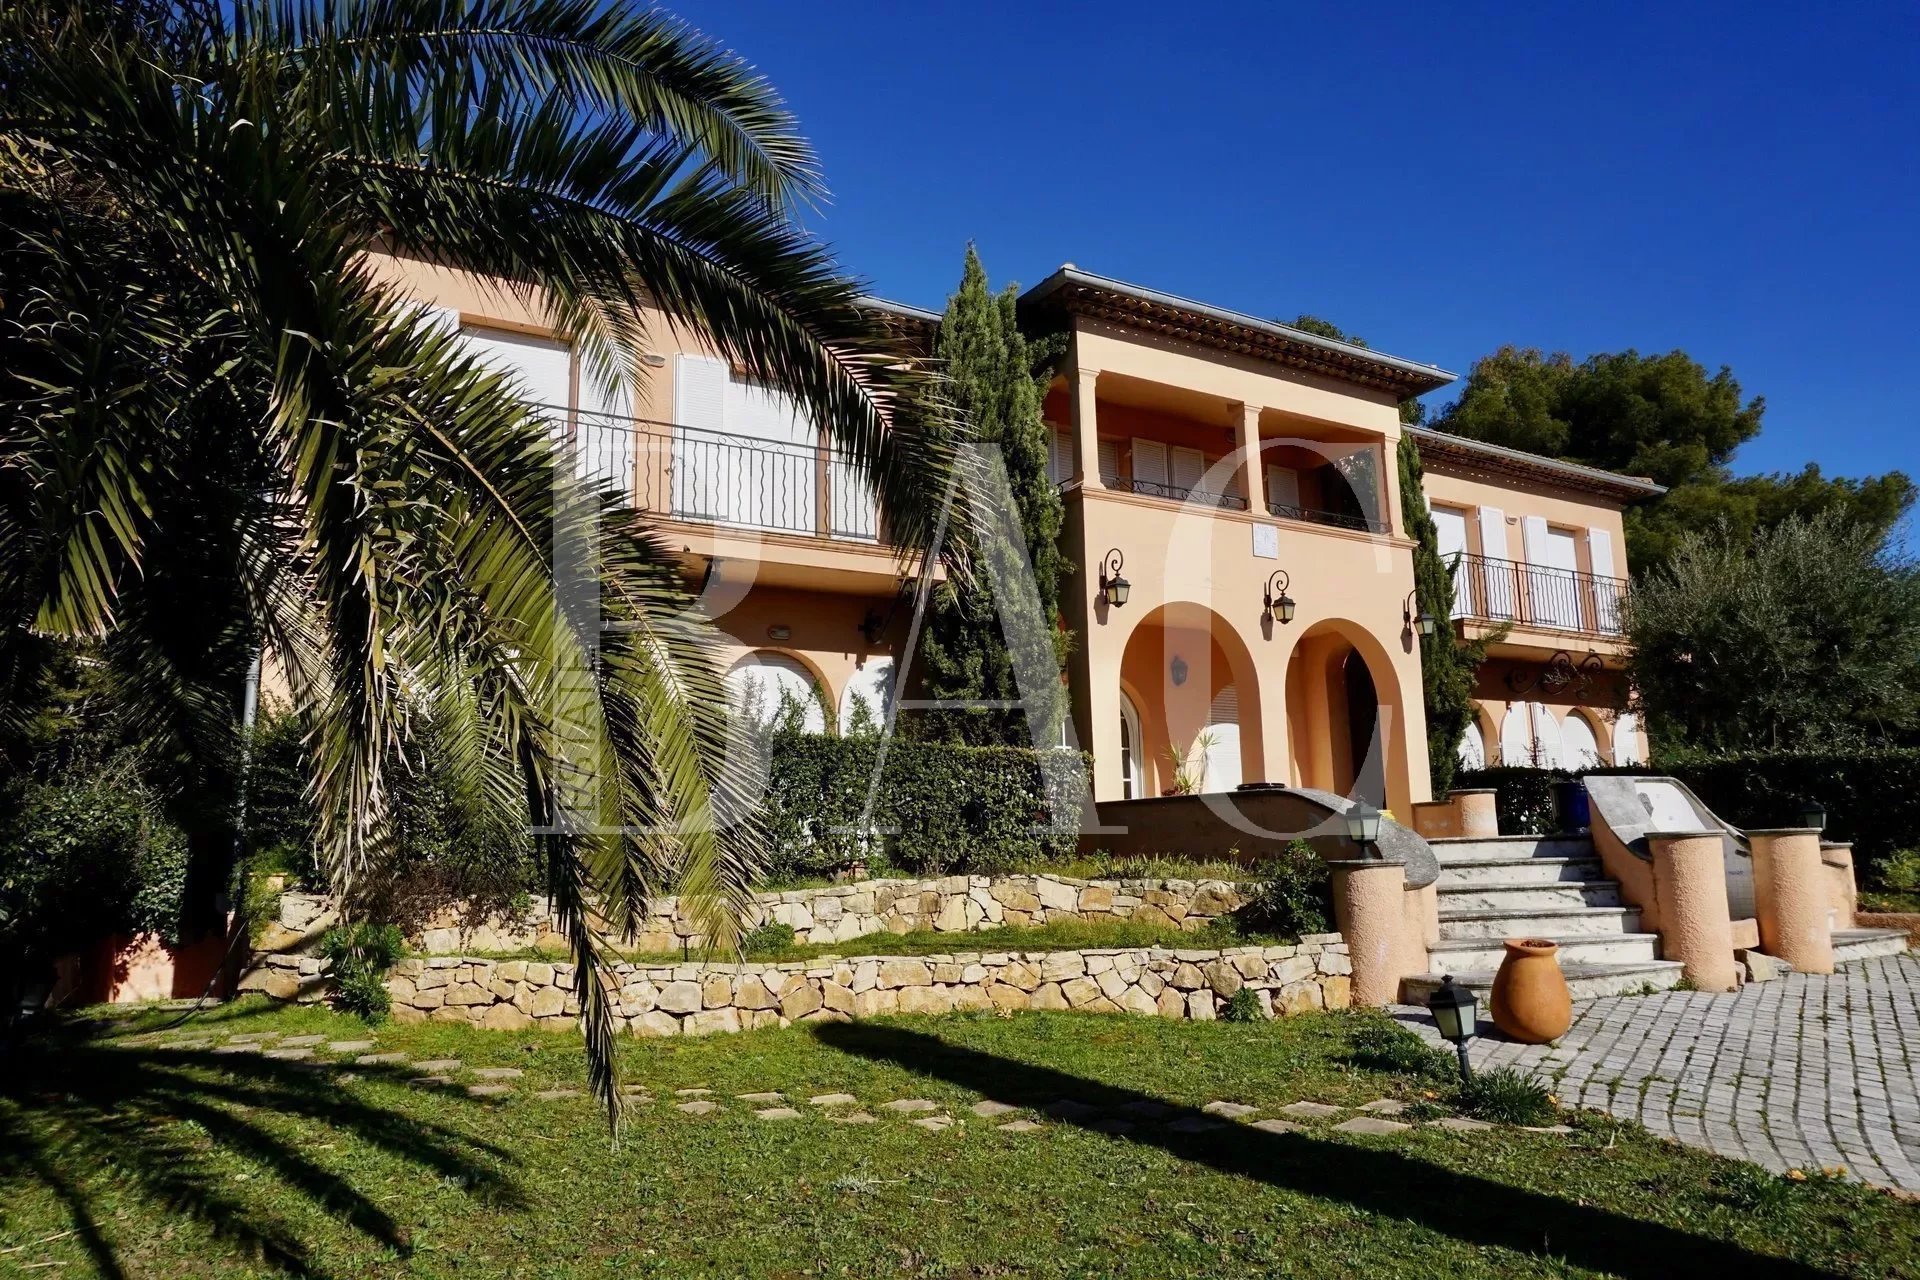 Les Issambres, property by the sea